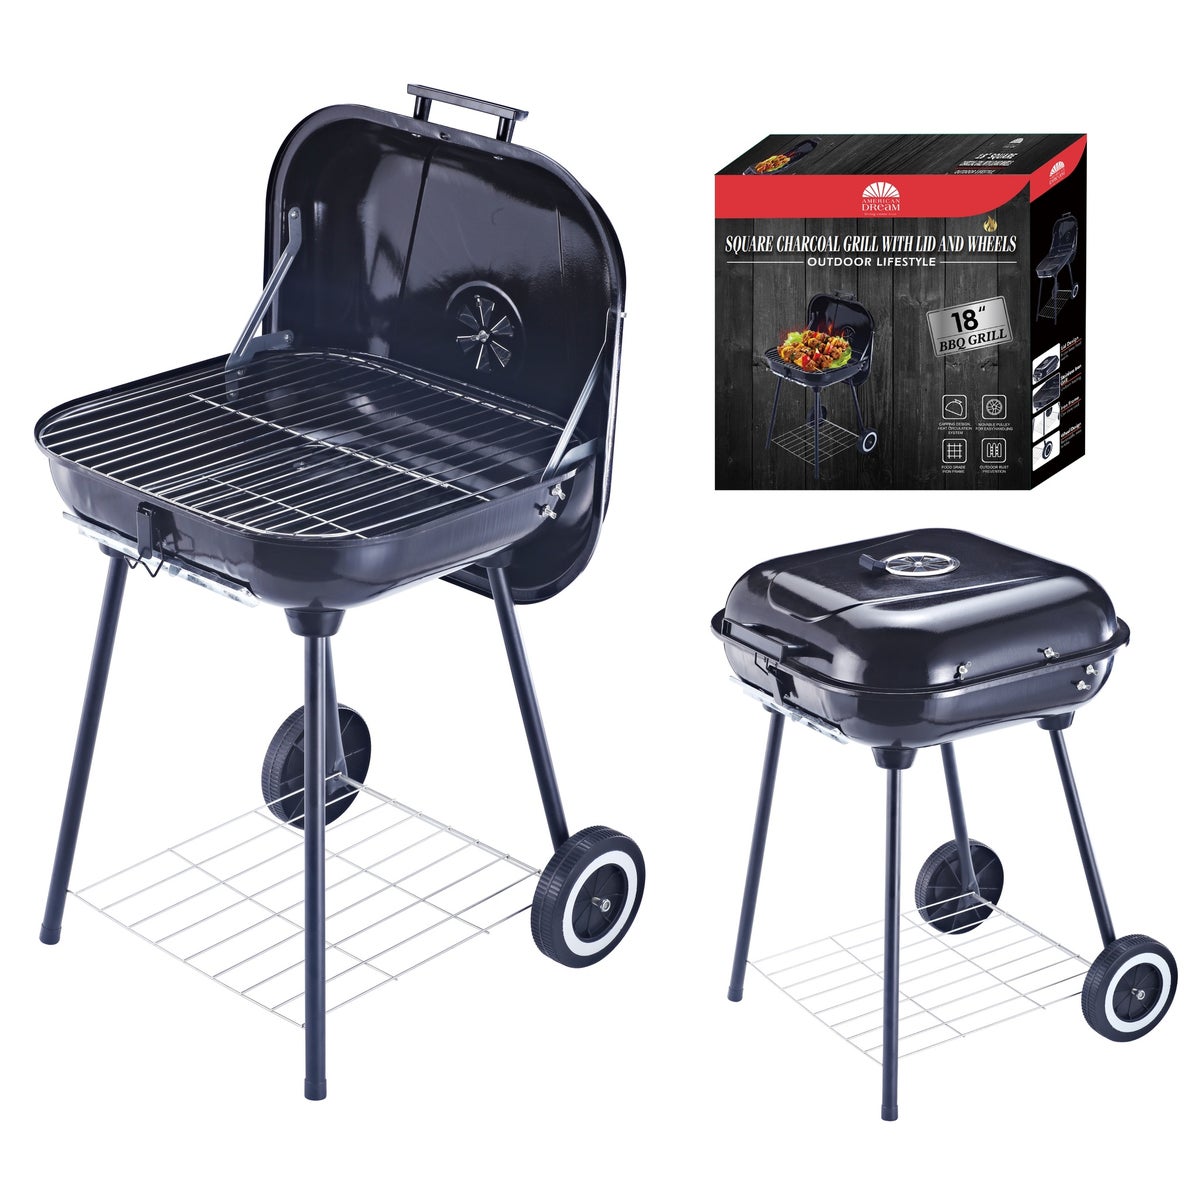 18" X 18" SQ Charcoal Grill with Lid and wheels (1)